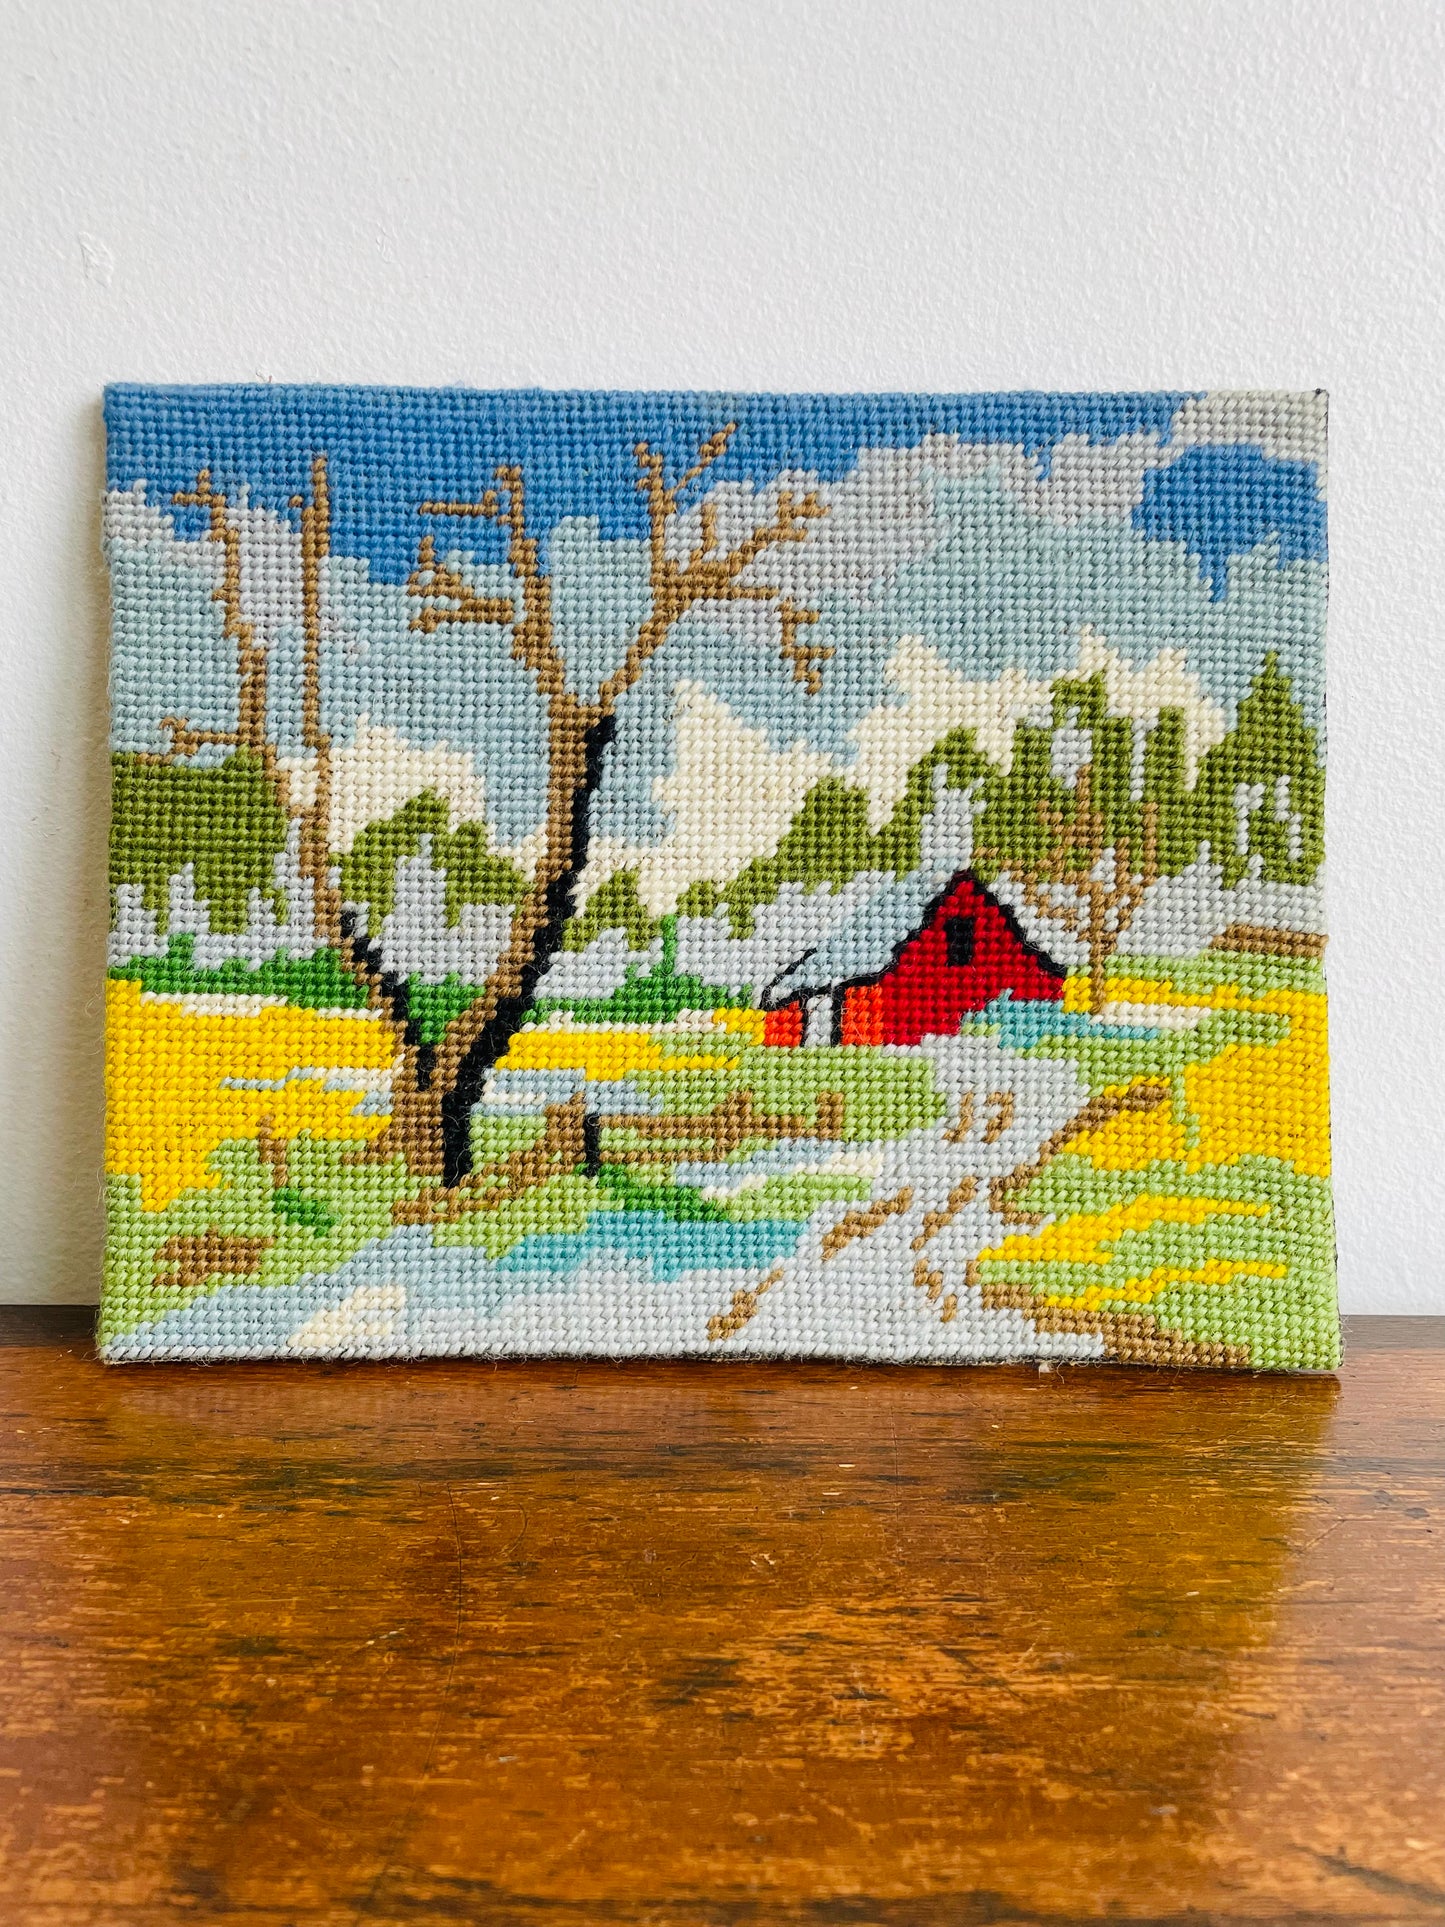 Adorable Red Barn Needlepoint Embroidery Picture on Board - Frame or Leave As-Is!